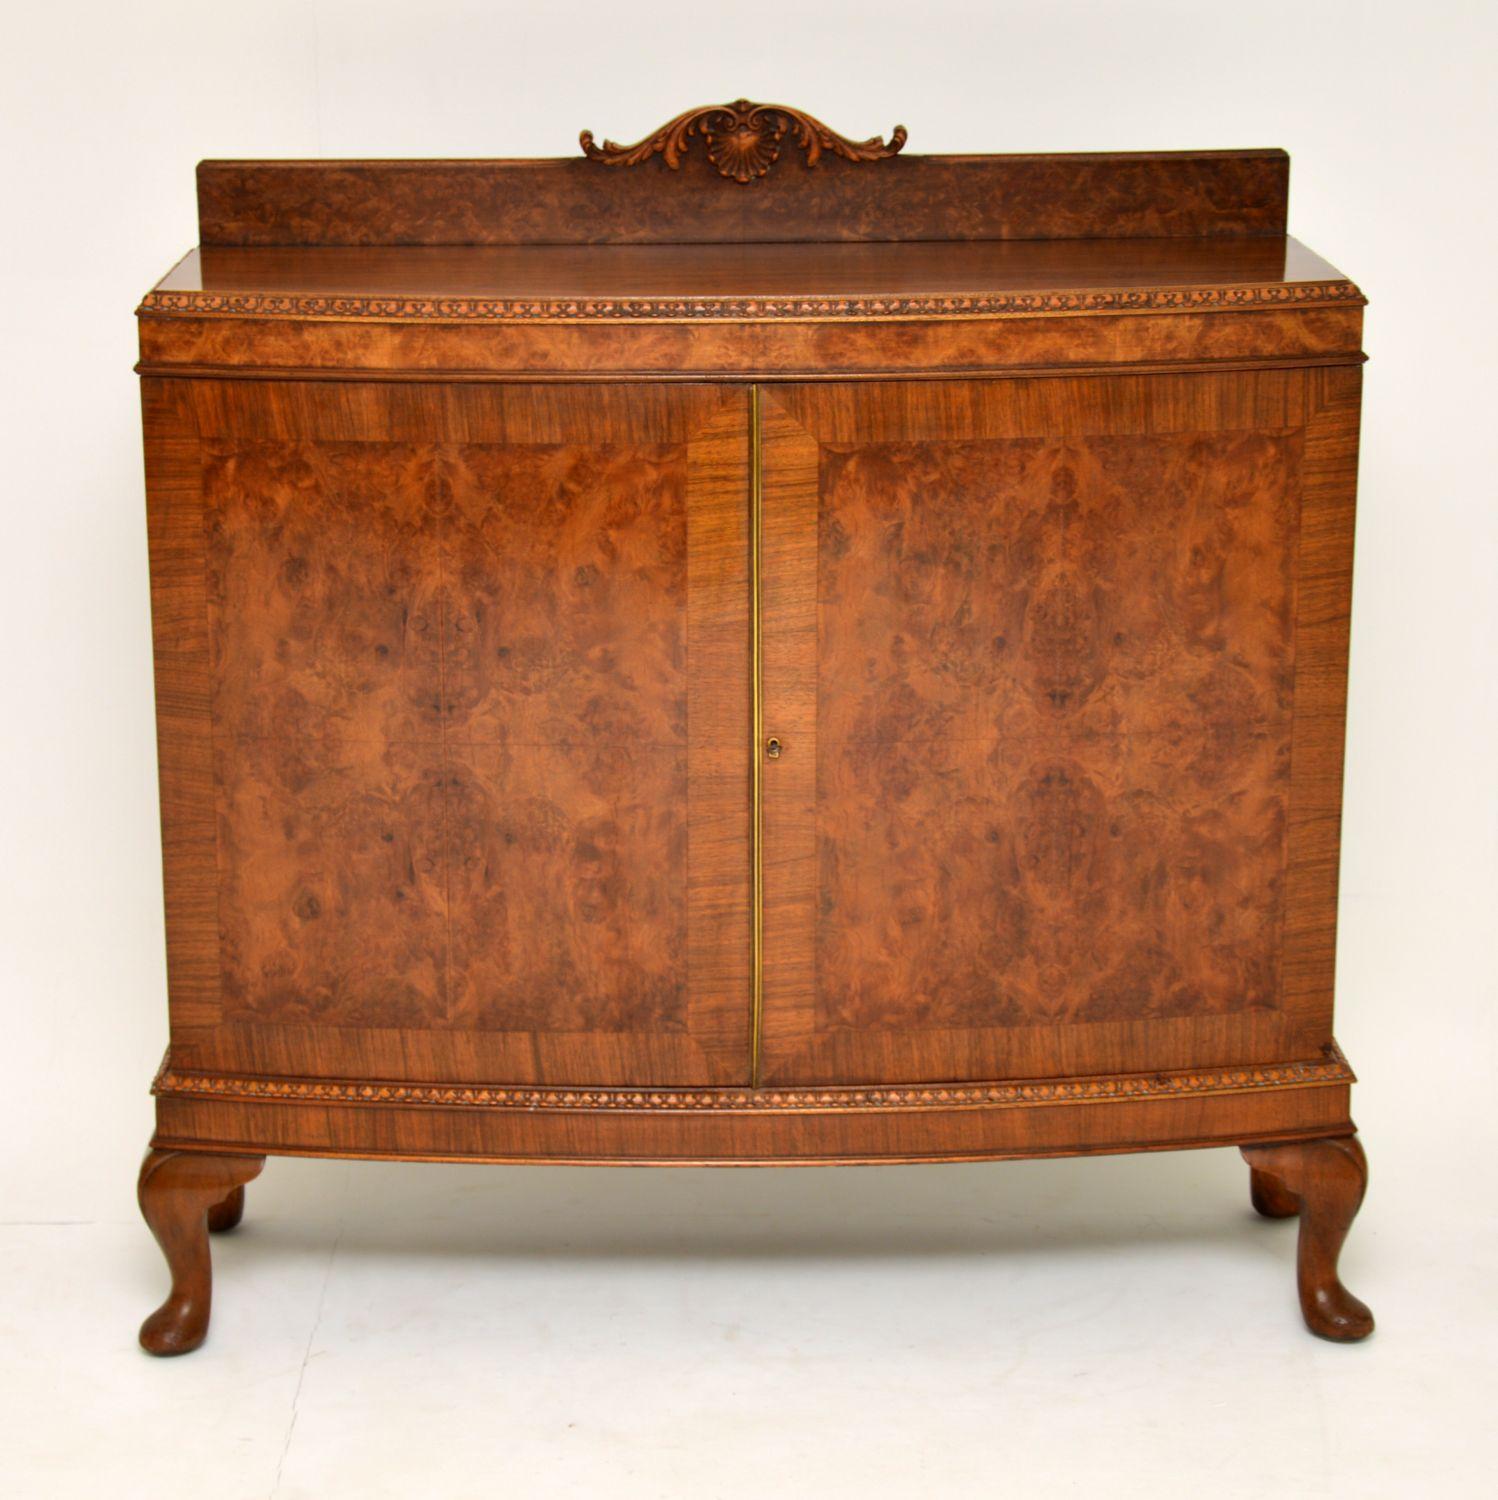 This antique walnut bow fronted cabinet is fine quality and is a very practicable item of furniture. It’s quite slim from back to front and has plenty of useful storage inside. The top back section is burr walnut and has some beautiful carving on